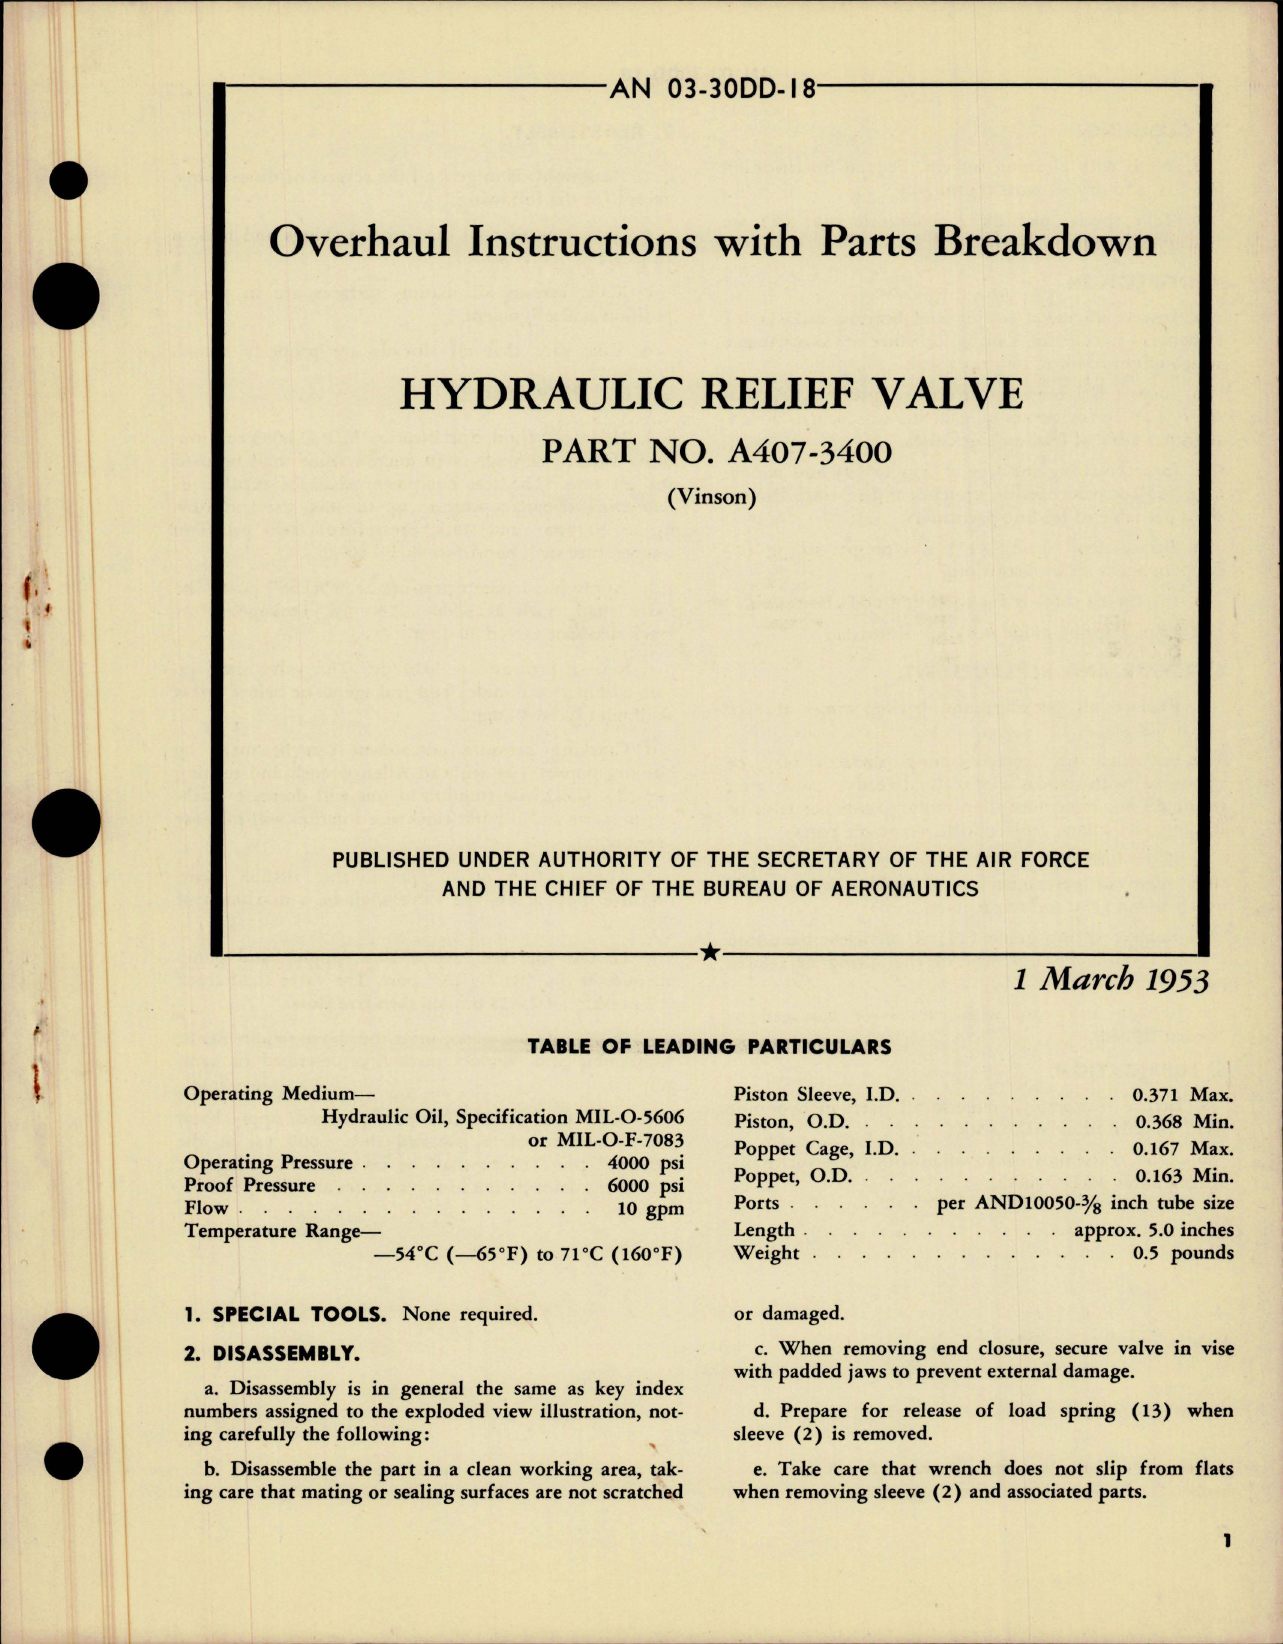 Sample page 1 from AirCorps Library document: Overhaul Instructions with Parts Breakdown for Hydraulic Relief Valve - Part A407-3400 